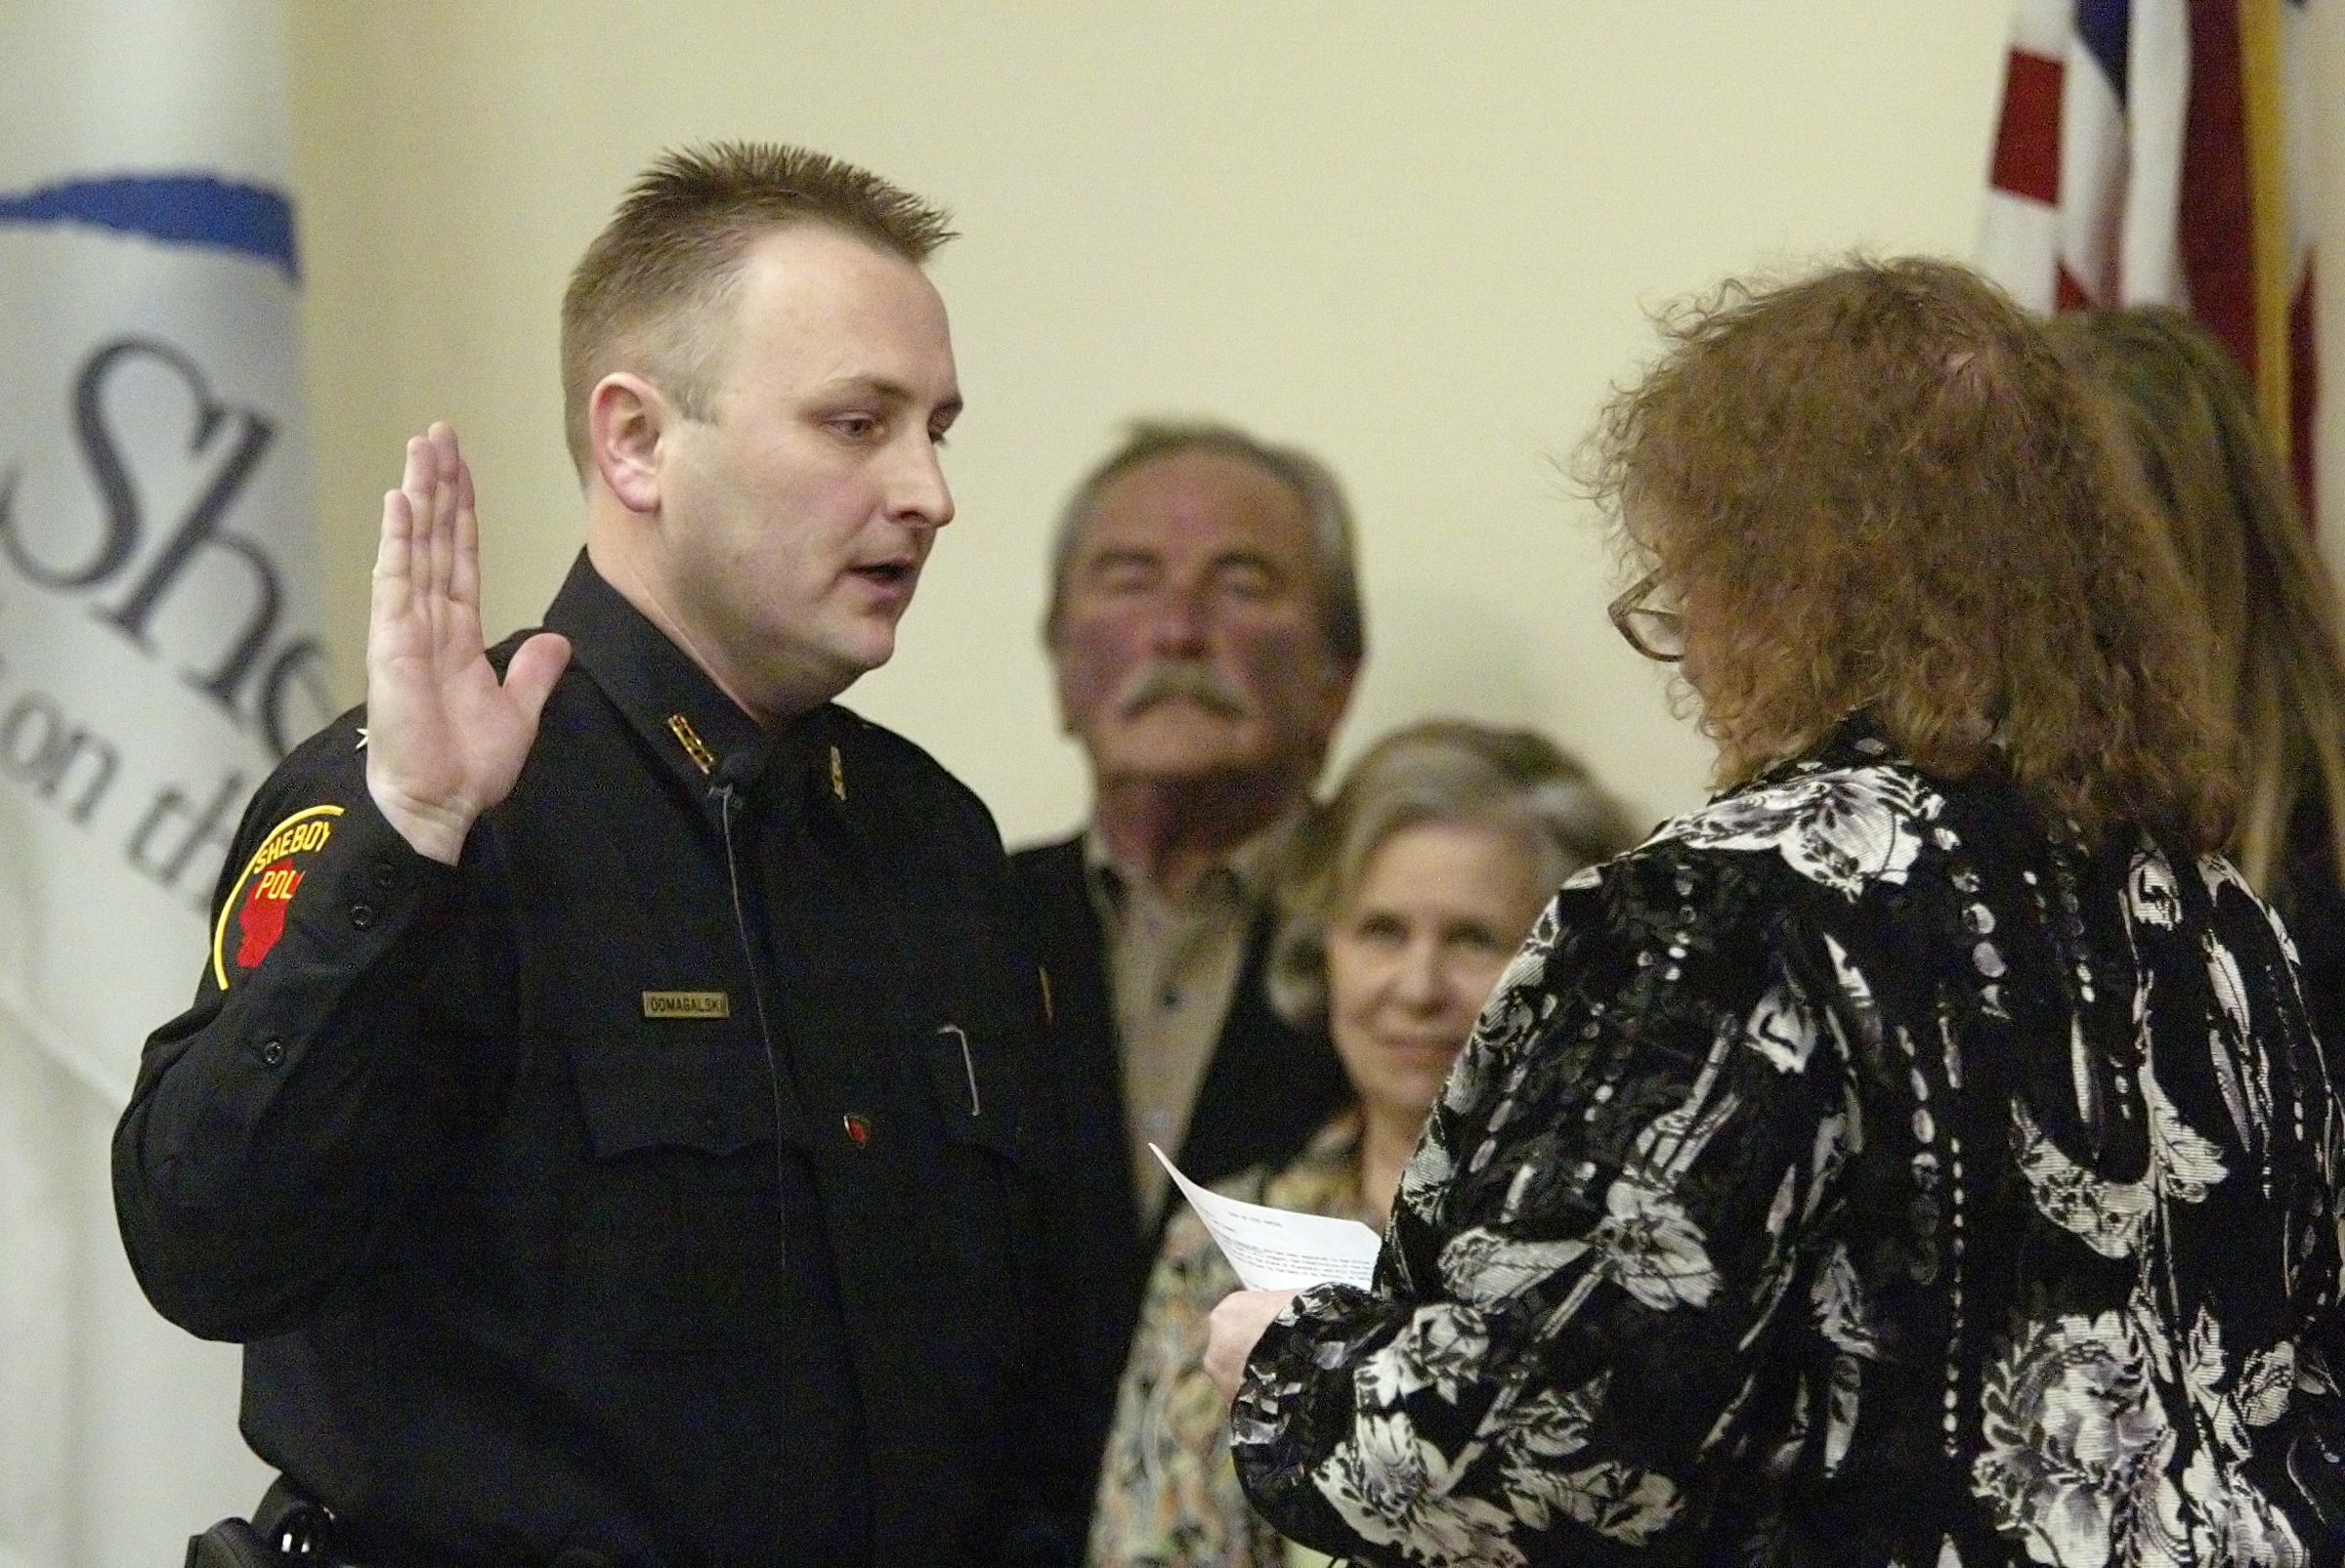 011810_SHE_Police Chief Domagalski swearing in